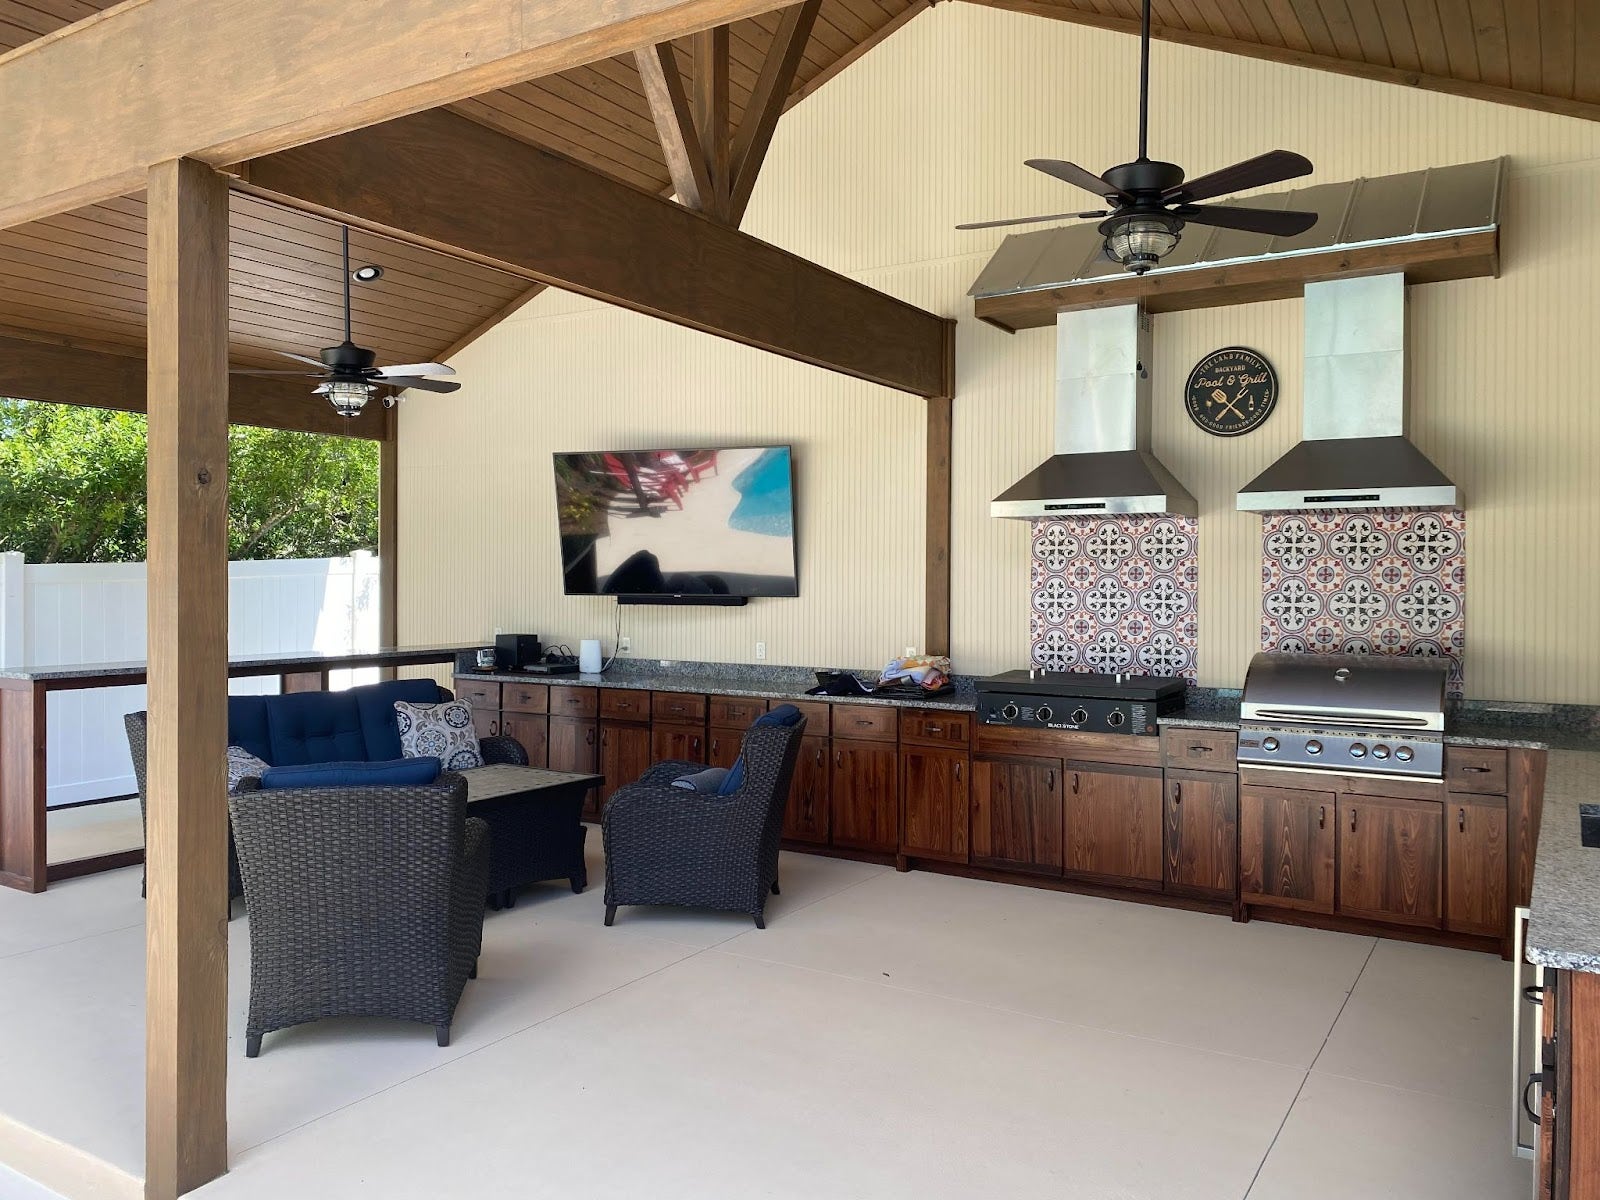 Expansive covered outdoor kitchen with dark wicker furniture, wood cabinetry, and decorative tile backsplash under a vaulted ceiling with fans two proline outdoor vent hoods over a grill and a blackstone - Proline Range Hoods - prolinerangehoods.com 